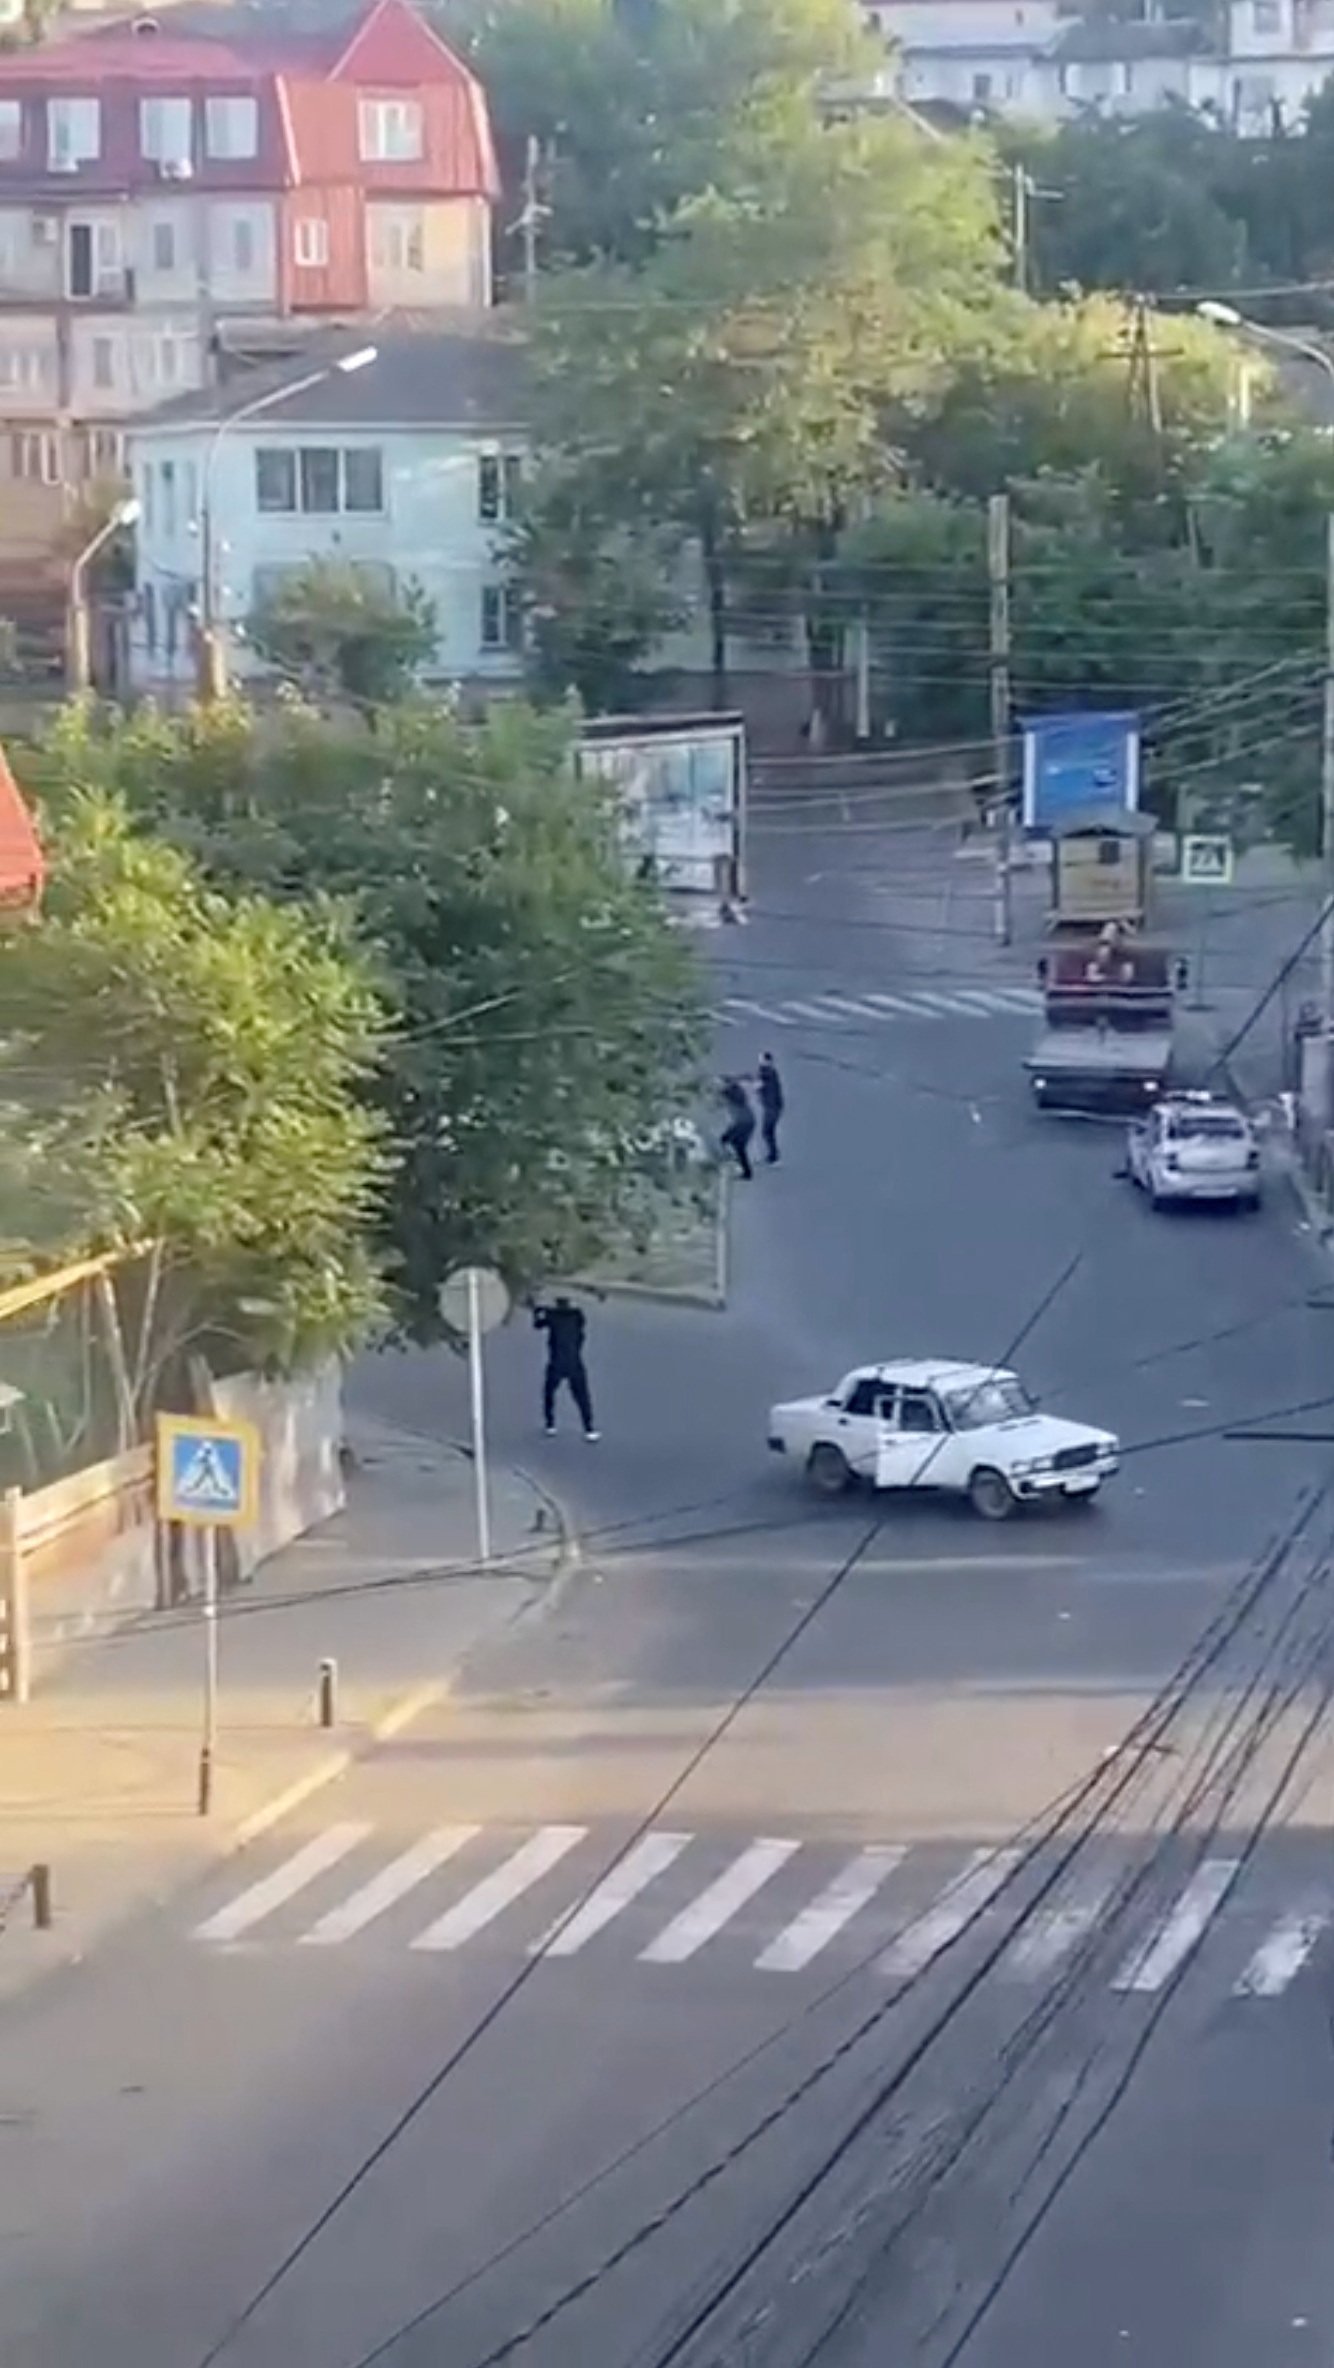 A shooting scene on a street in Makhachkala in Dagestan, southern Russia. Photo: from video obtained by Reuters